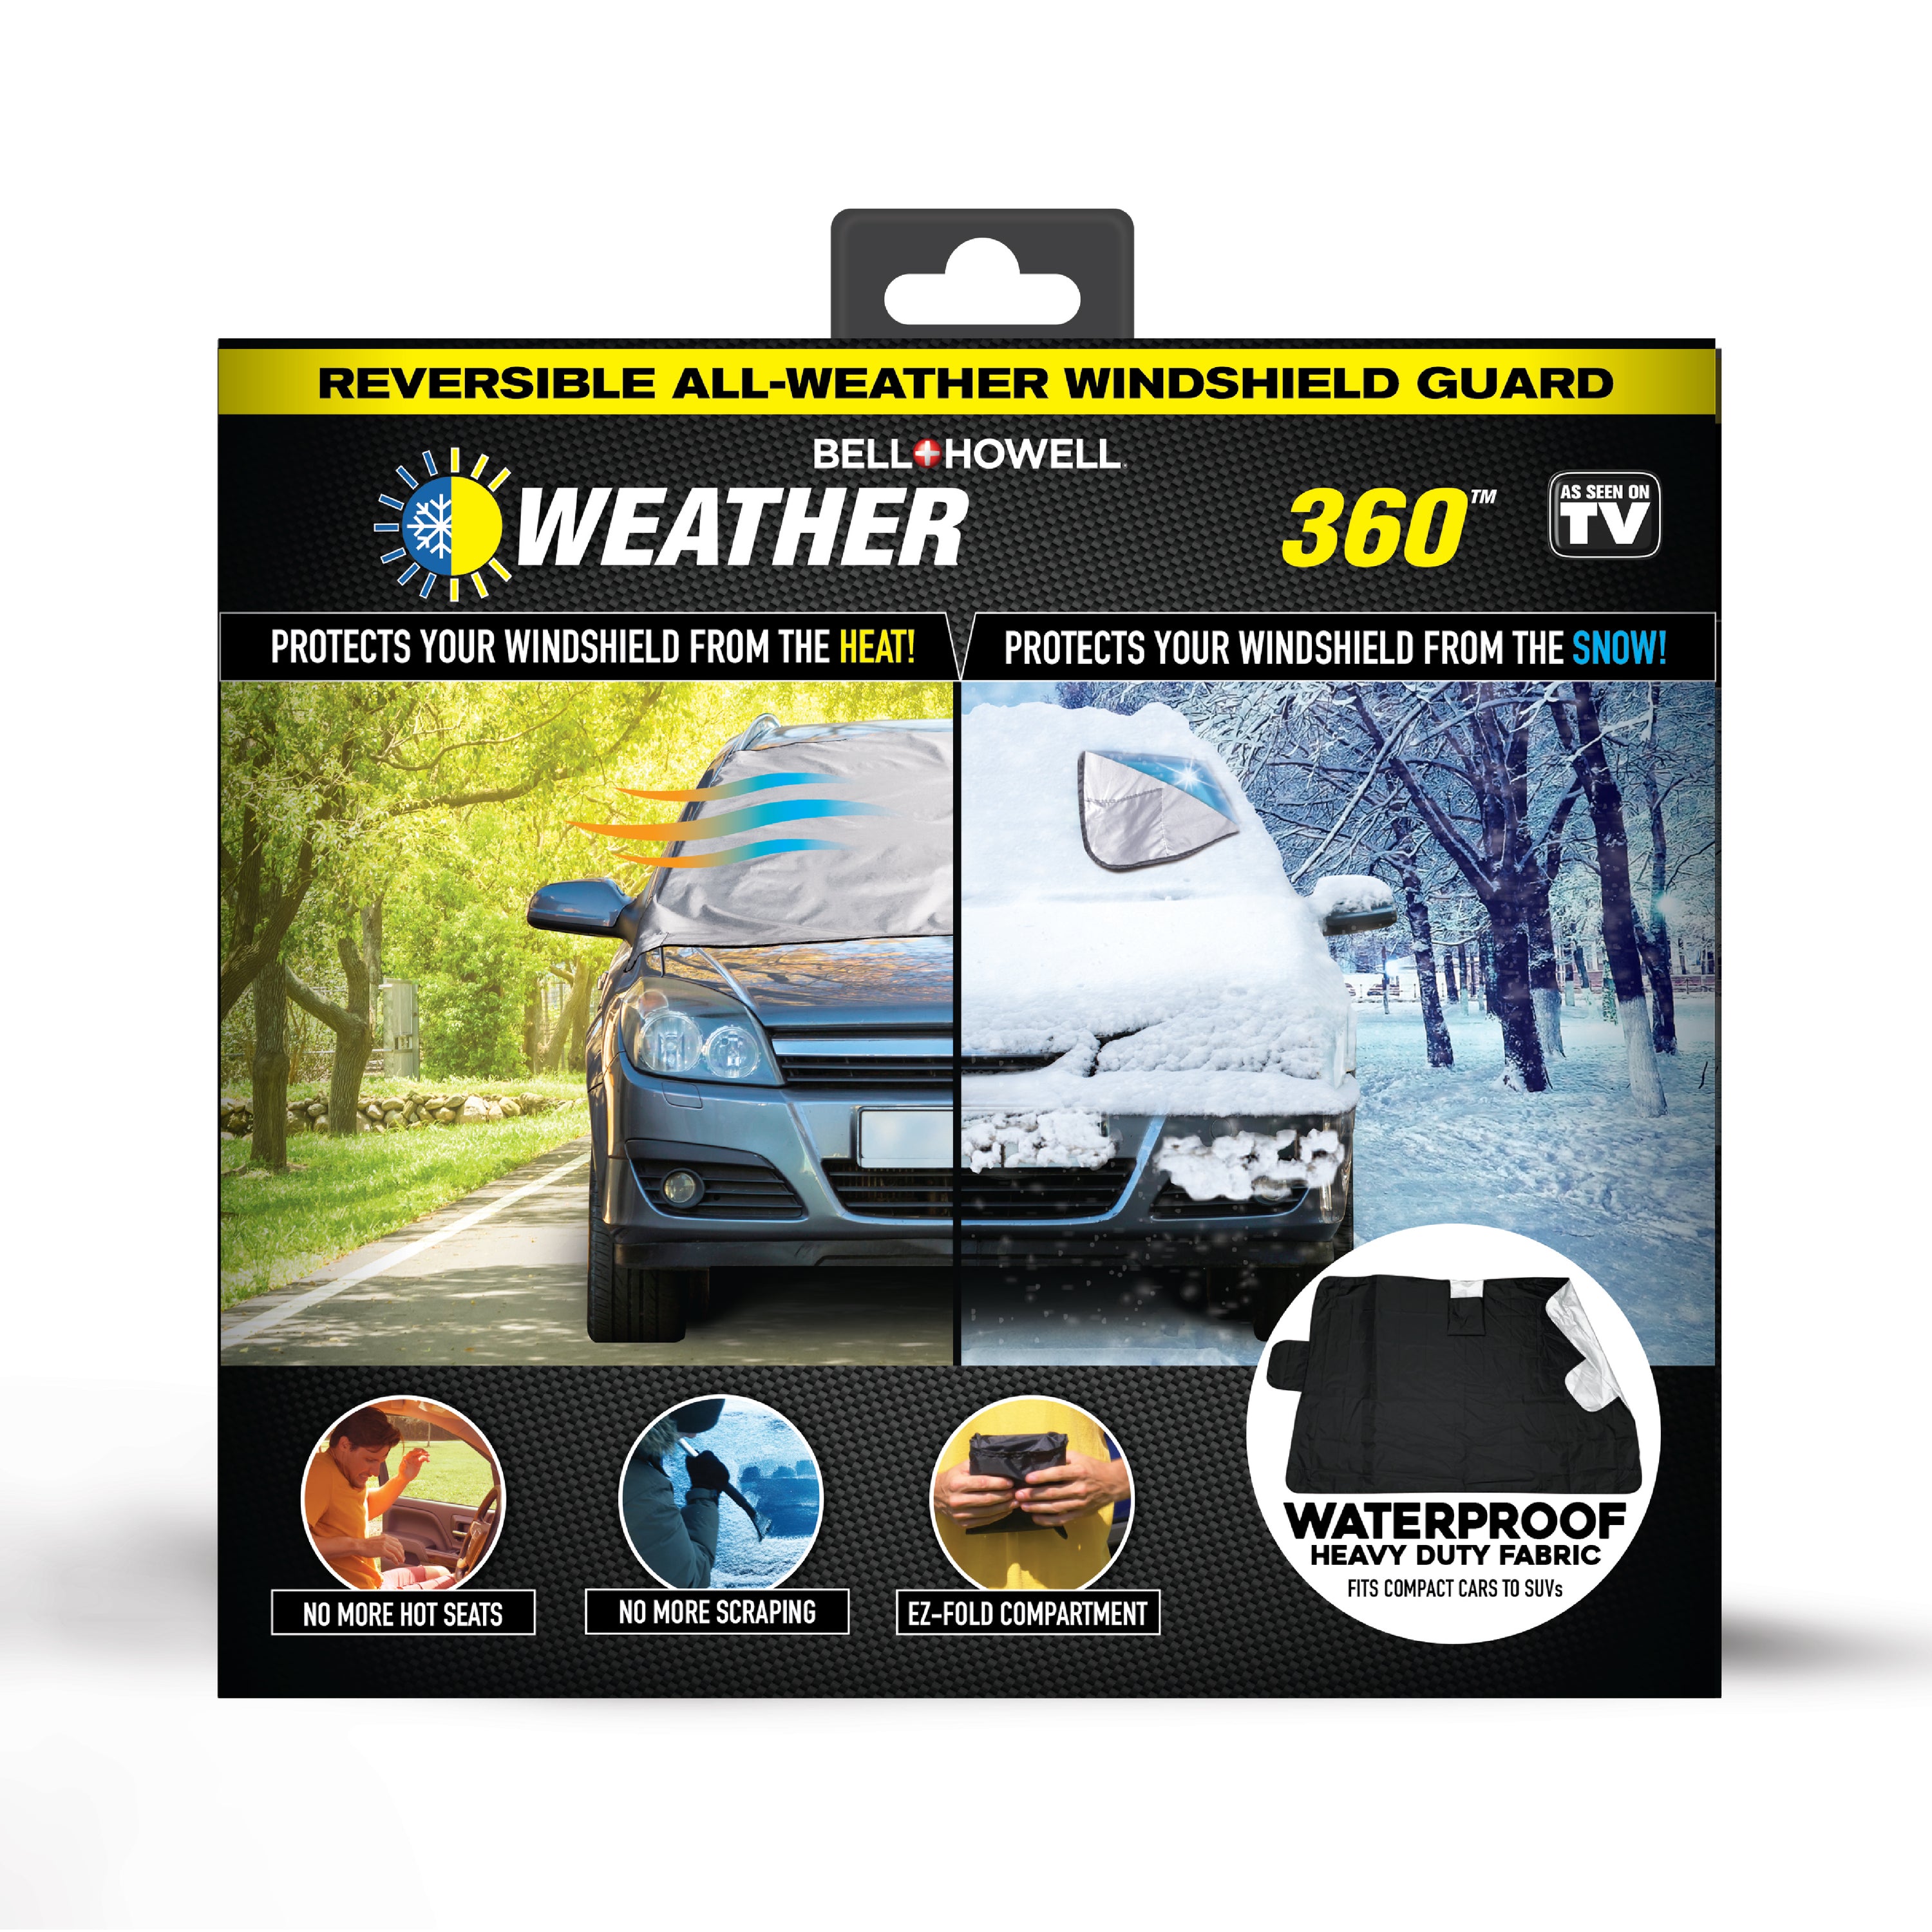 Weatherforce 360 All-Weather Sunshade Ice Cover Heavy Duty Reversible  Windshield Protector 6 by 10 feet Fabric For Any Car Protects from Heat &  Snow